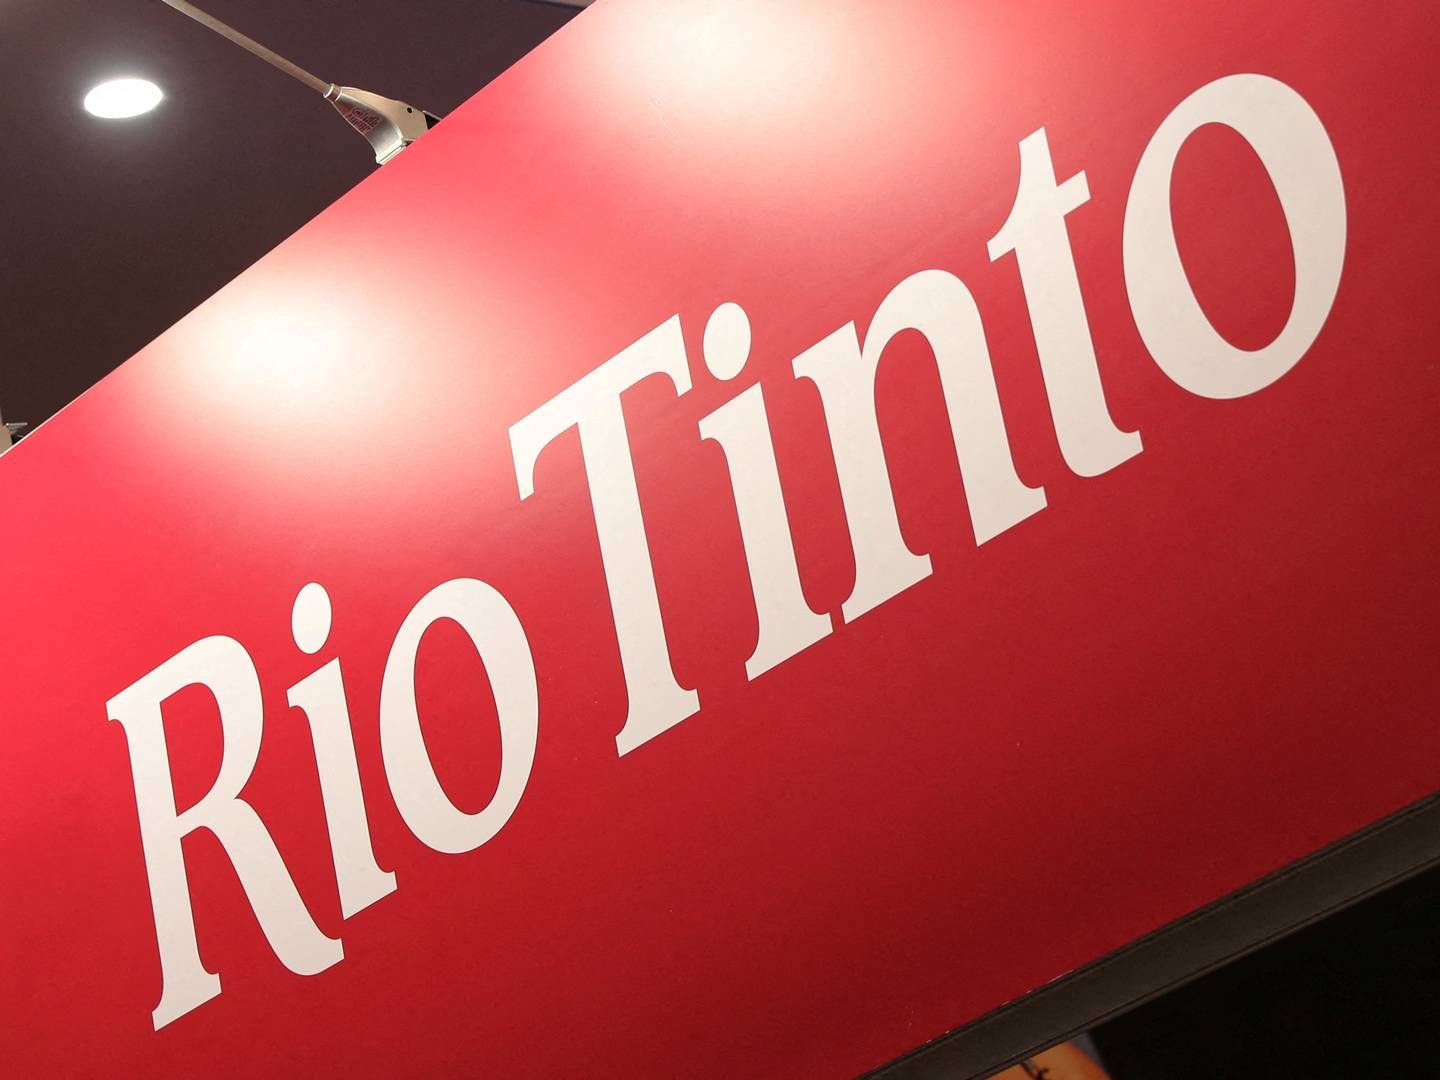 At Capital Link’s conference held Tuesday during Singapore Maritime Week, Rio Tint’s Head of Commercial Operations, Laure Baratgin argued that no single stakeholder of the shipping supply chain is willing to accept the entire bill, neither Rio Tinto.